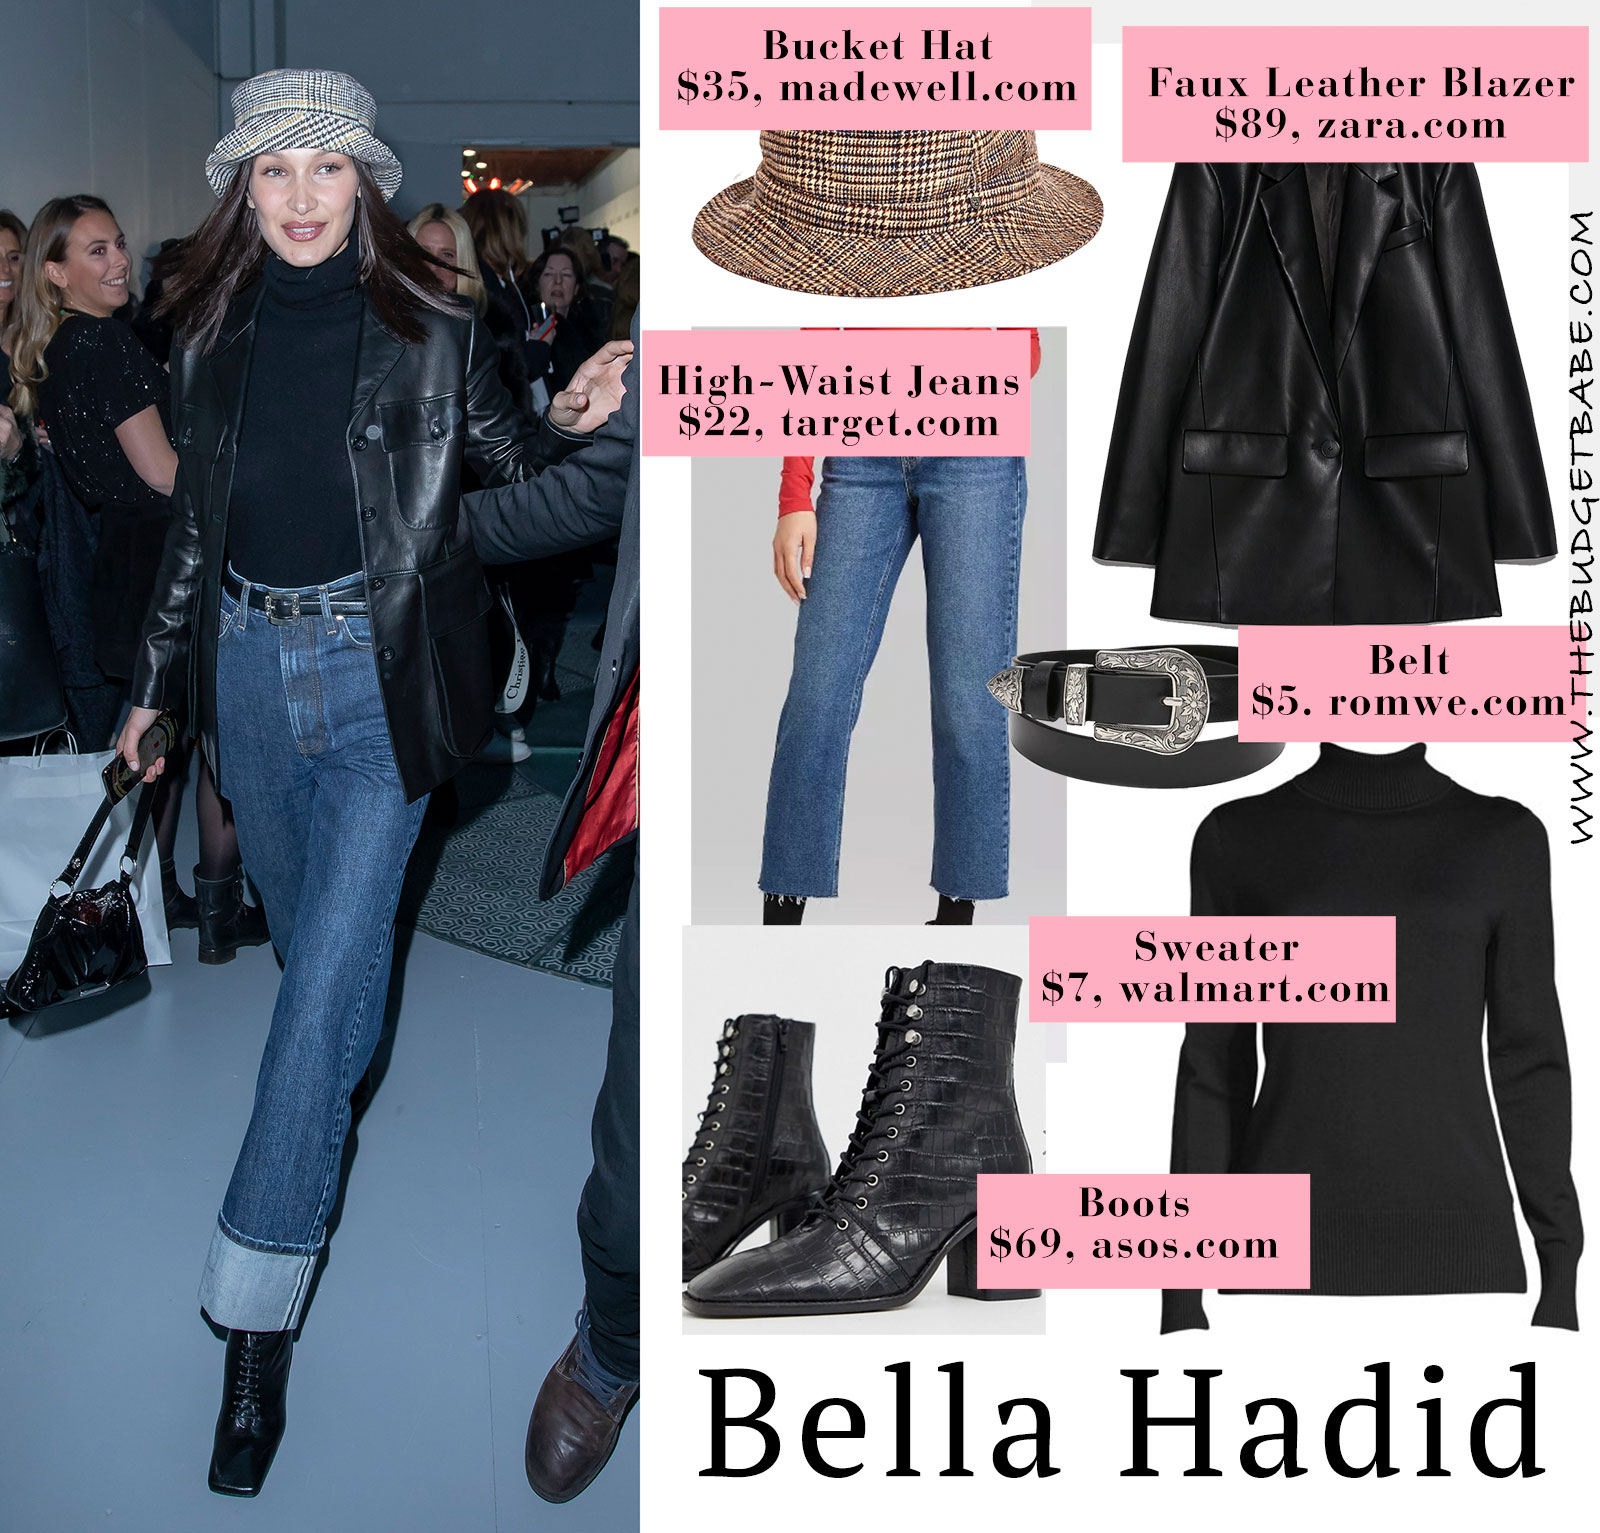 Bella Hadid's leather blazer and high waist jeans look for less